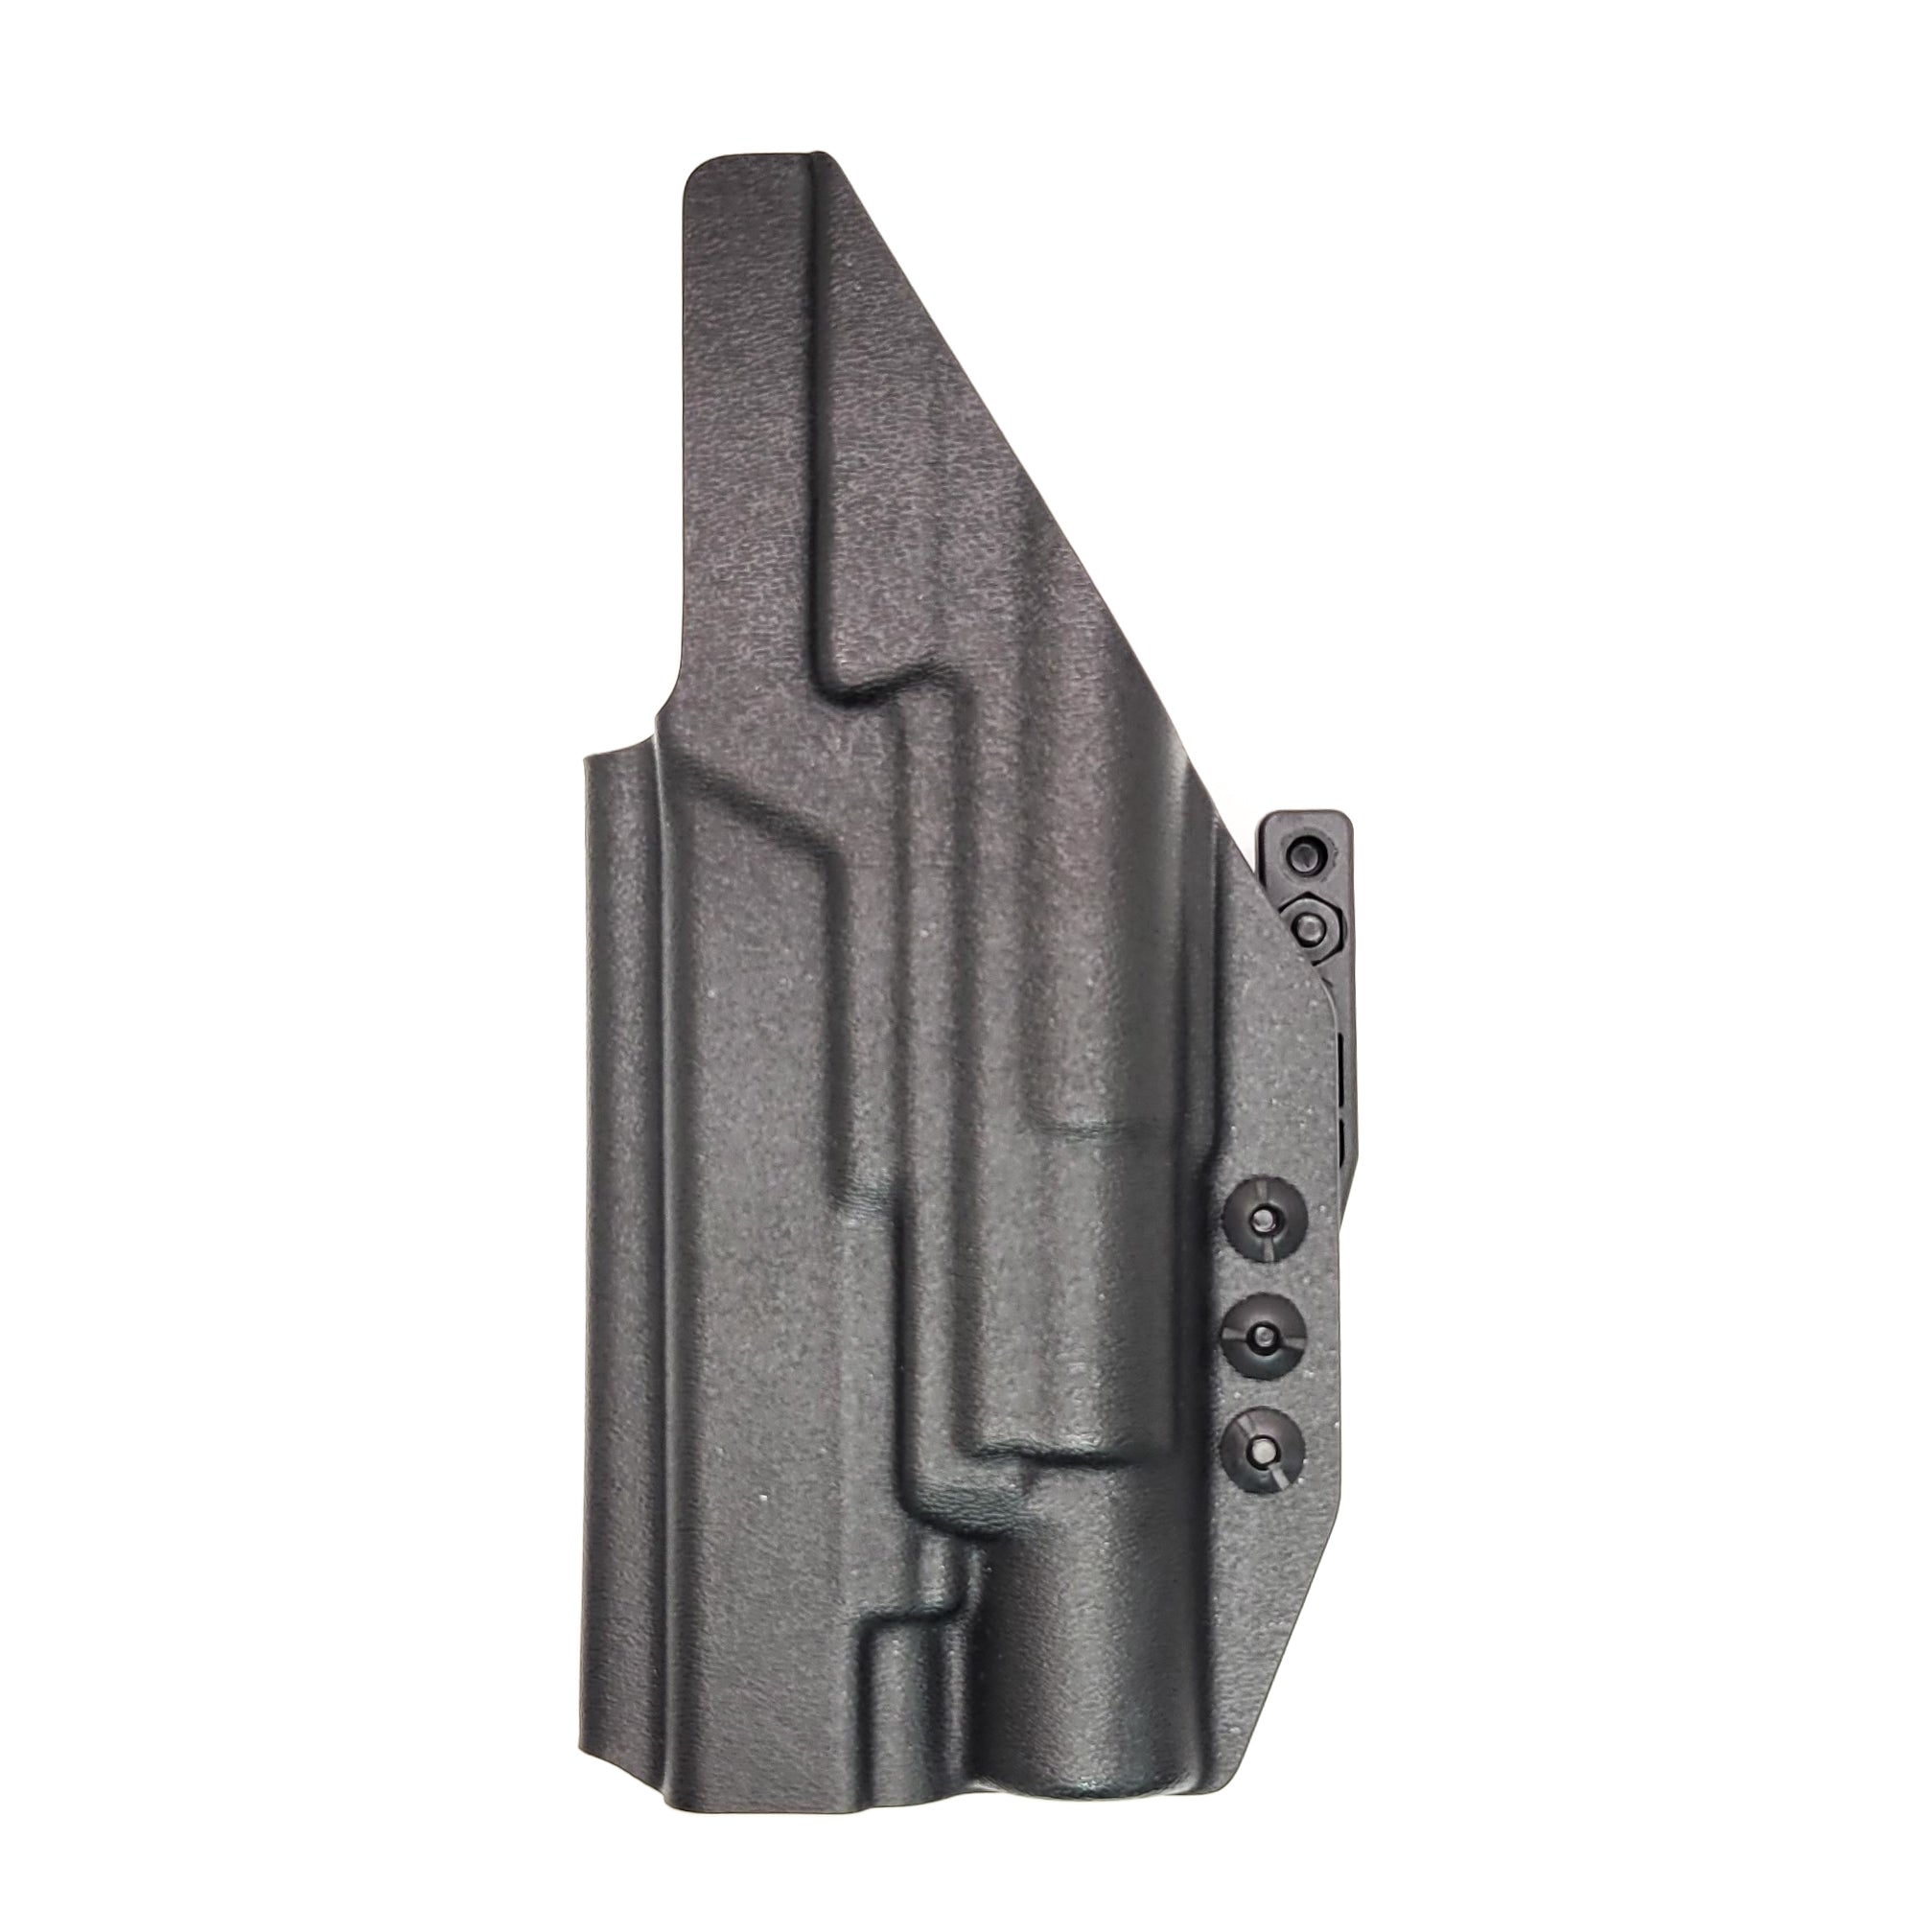 For the best, IWB AIWB Inside Waistband Taco Style Holster designed to fit the Glock 34, 17, and 19 Gen 5 with the Surefire X300U A or B X300U-A or X300U-B weapon-mounted light, shop Four Brothers Holsters. Adjustable retention and ride height, high sweat guard, minimum material for reduced printing. Made in the USA.